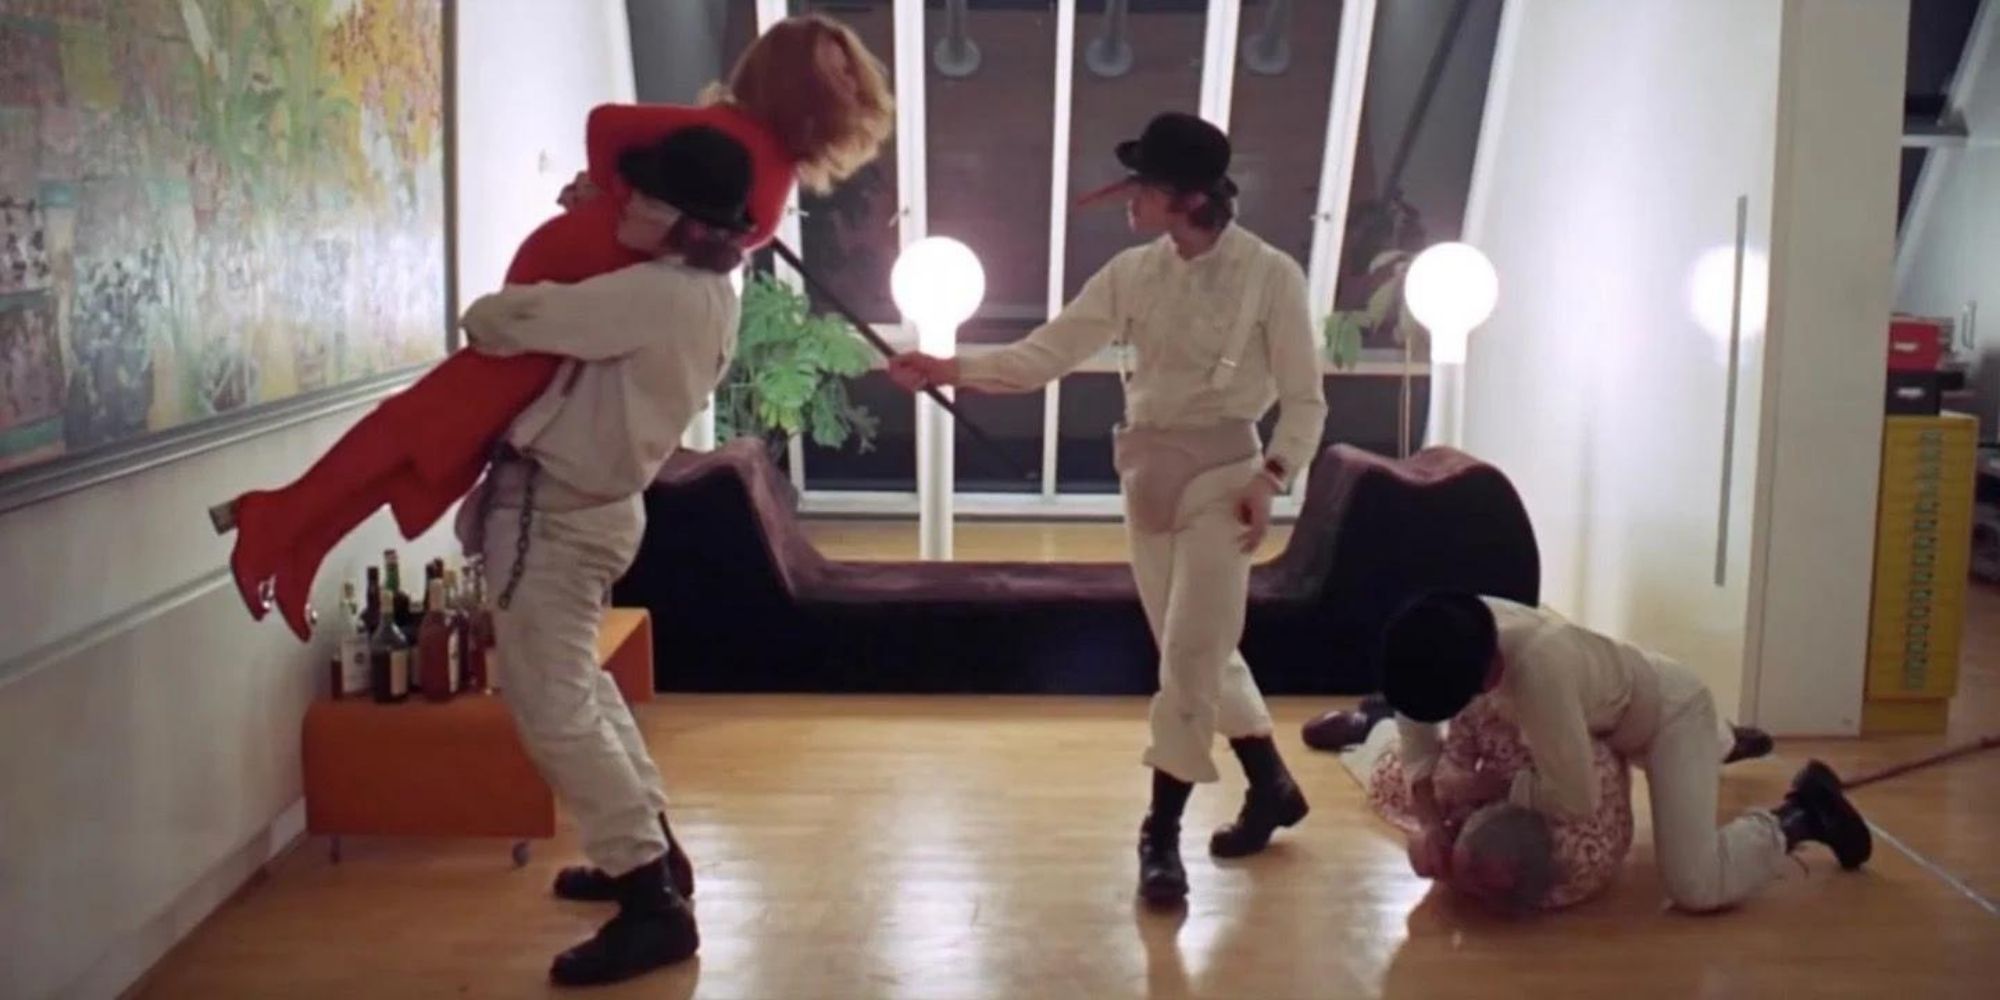 Singing in the Rain sequence in A Clockwork Orange